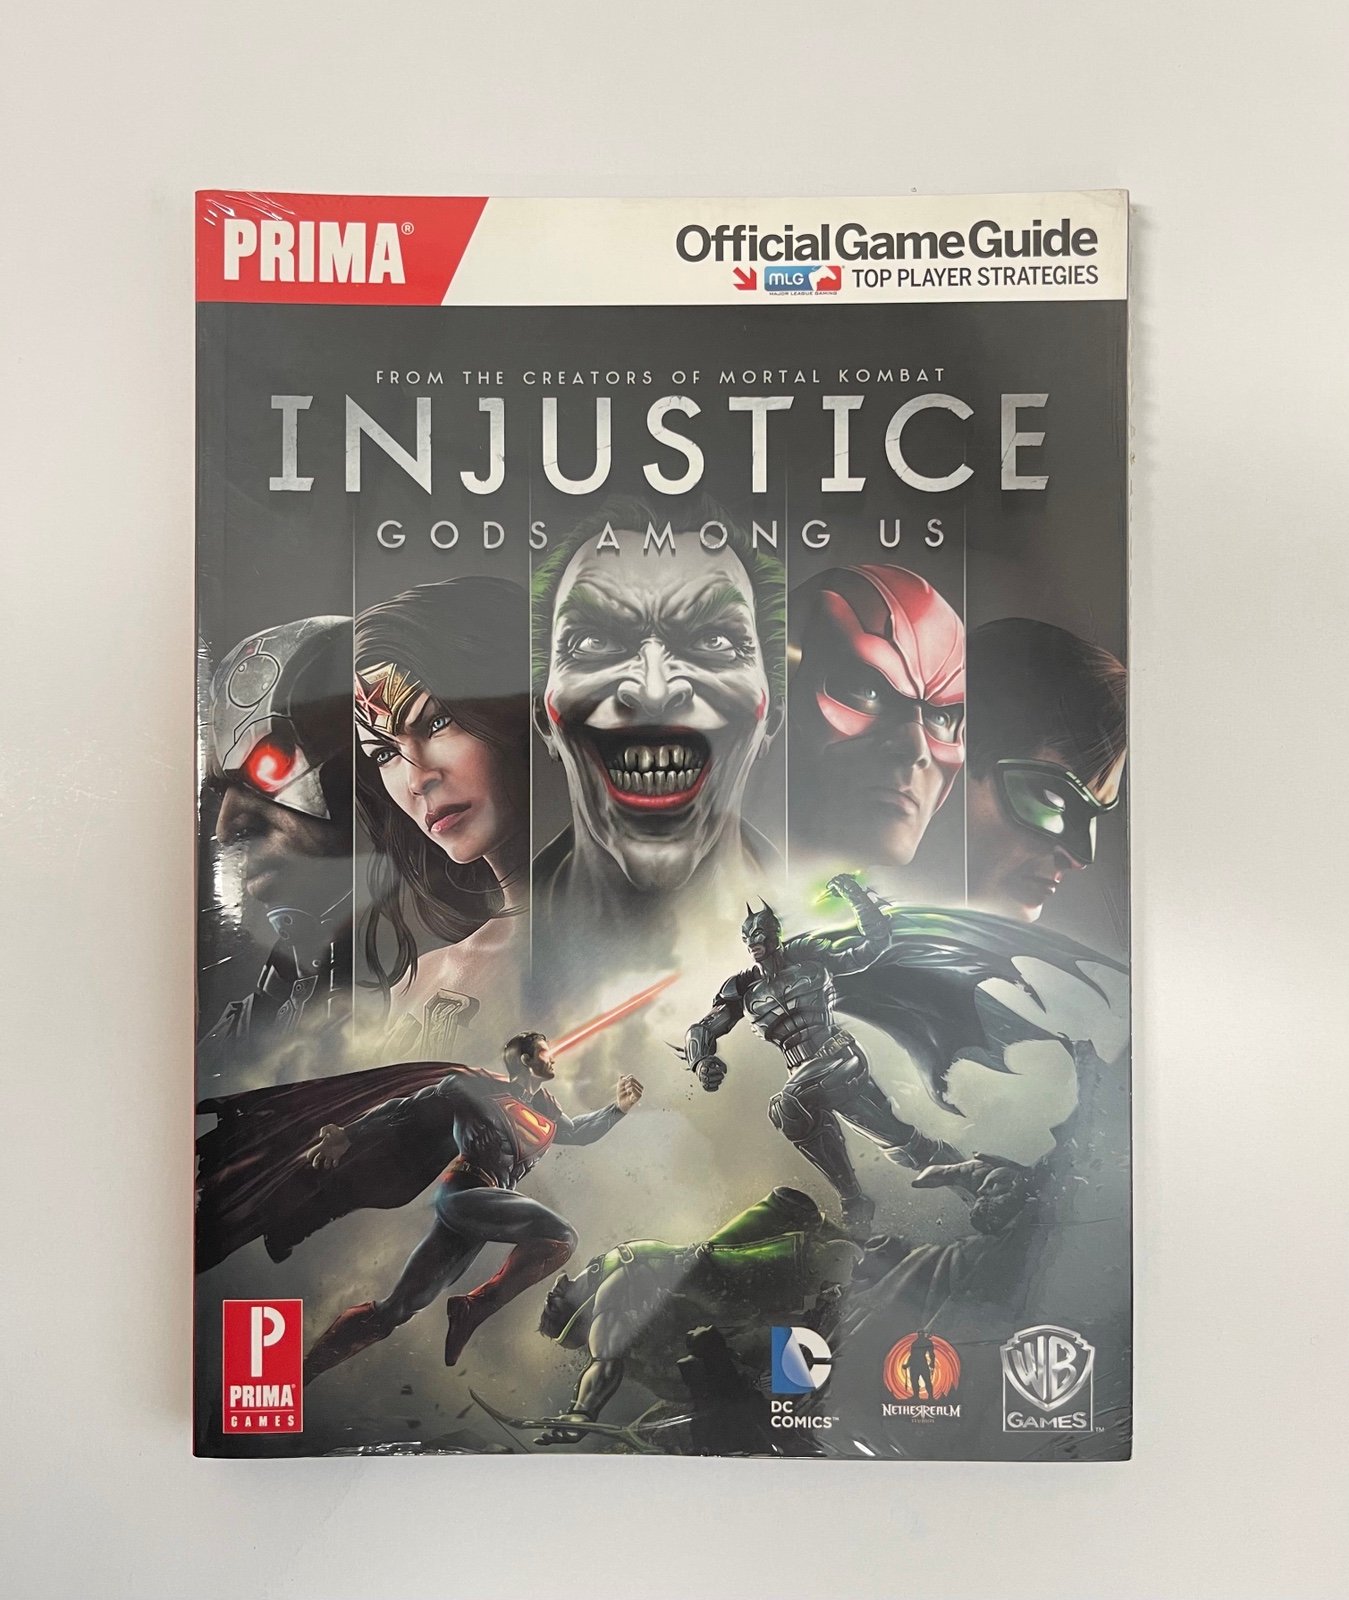 Injustice Gods Among Us Official Strategy Guide Xbox 360/PS3/Wii U New & Sealed BnIW2JR9y